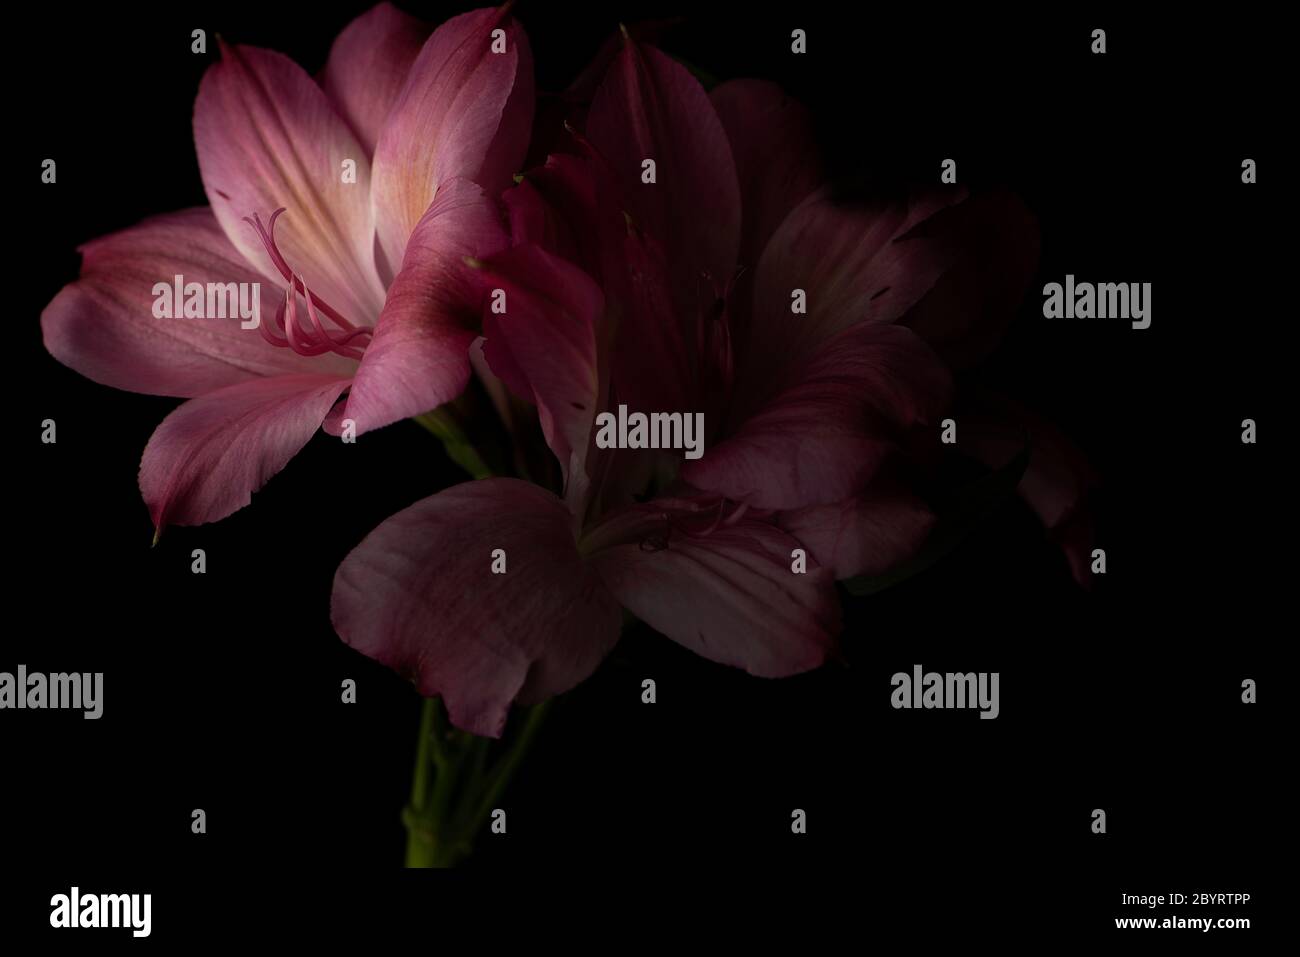 Pink Peruvian Lily, or Lily of the Incas, flower on a black background and shadow areas Stock Photo